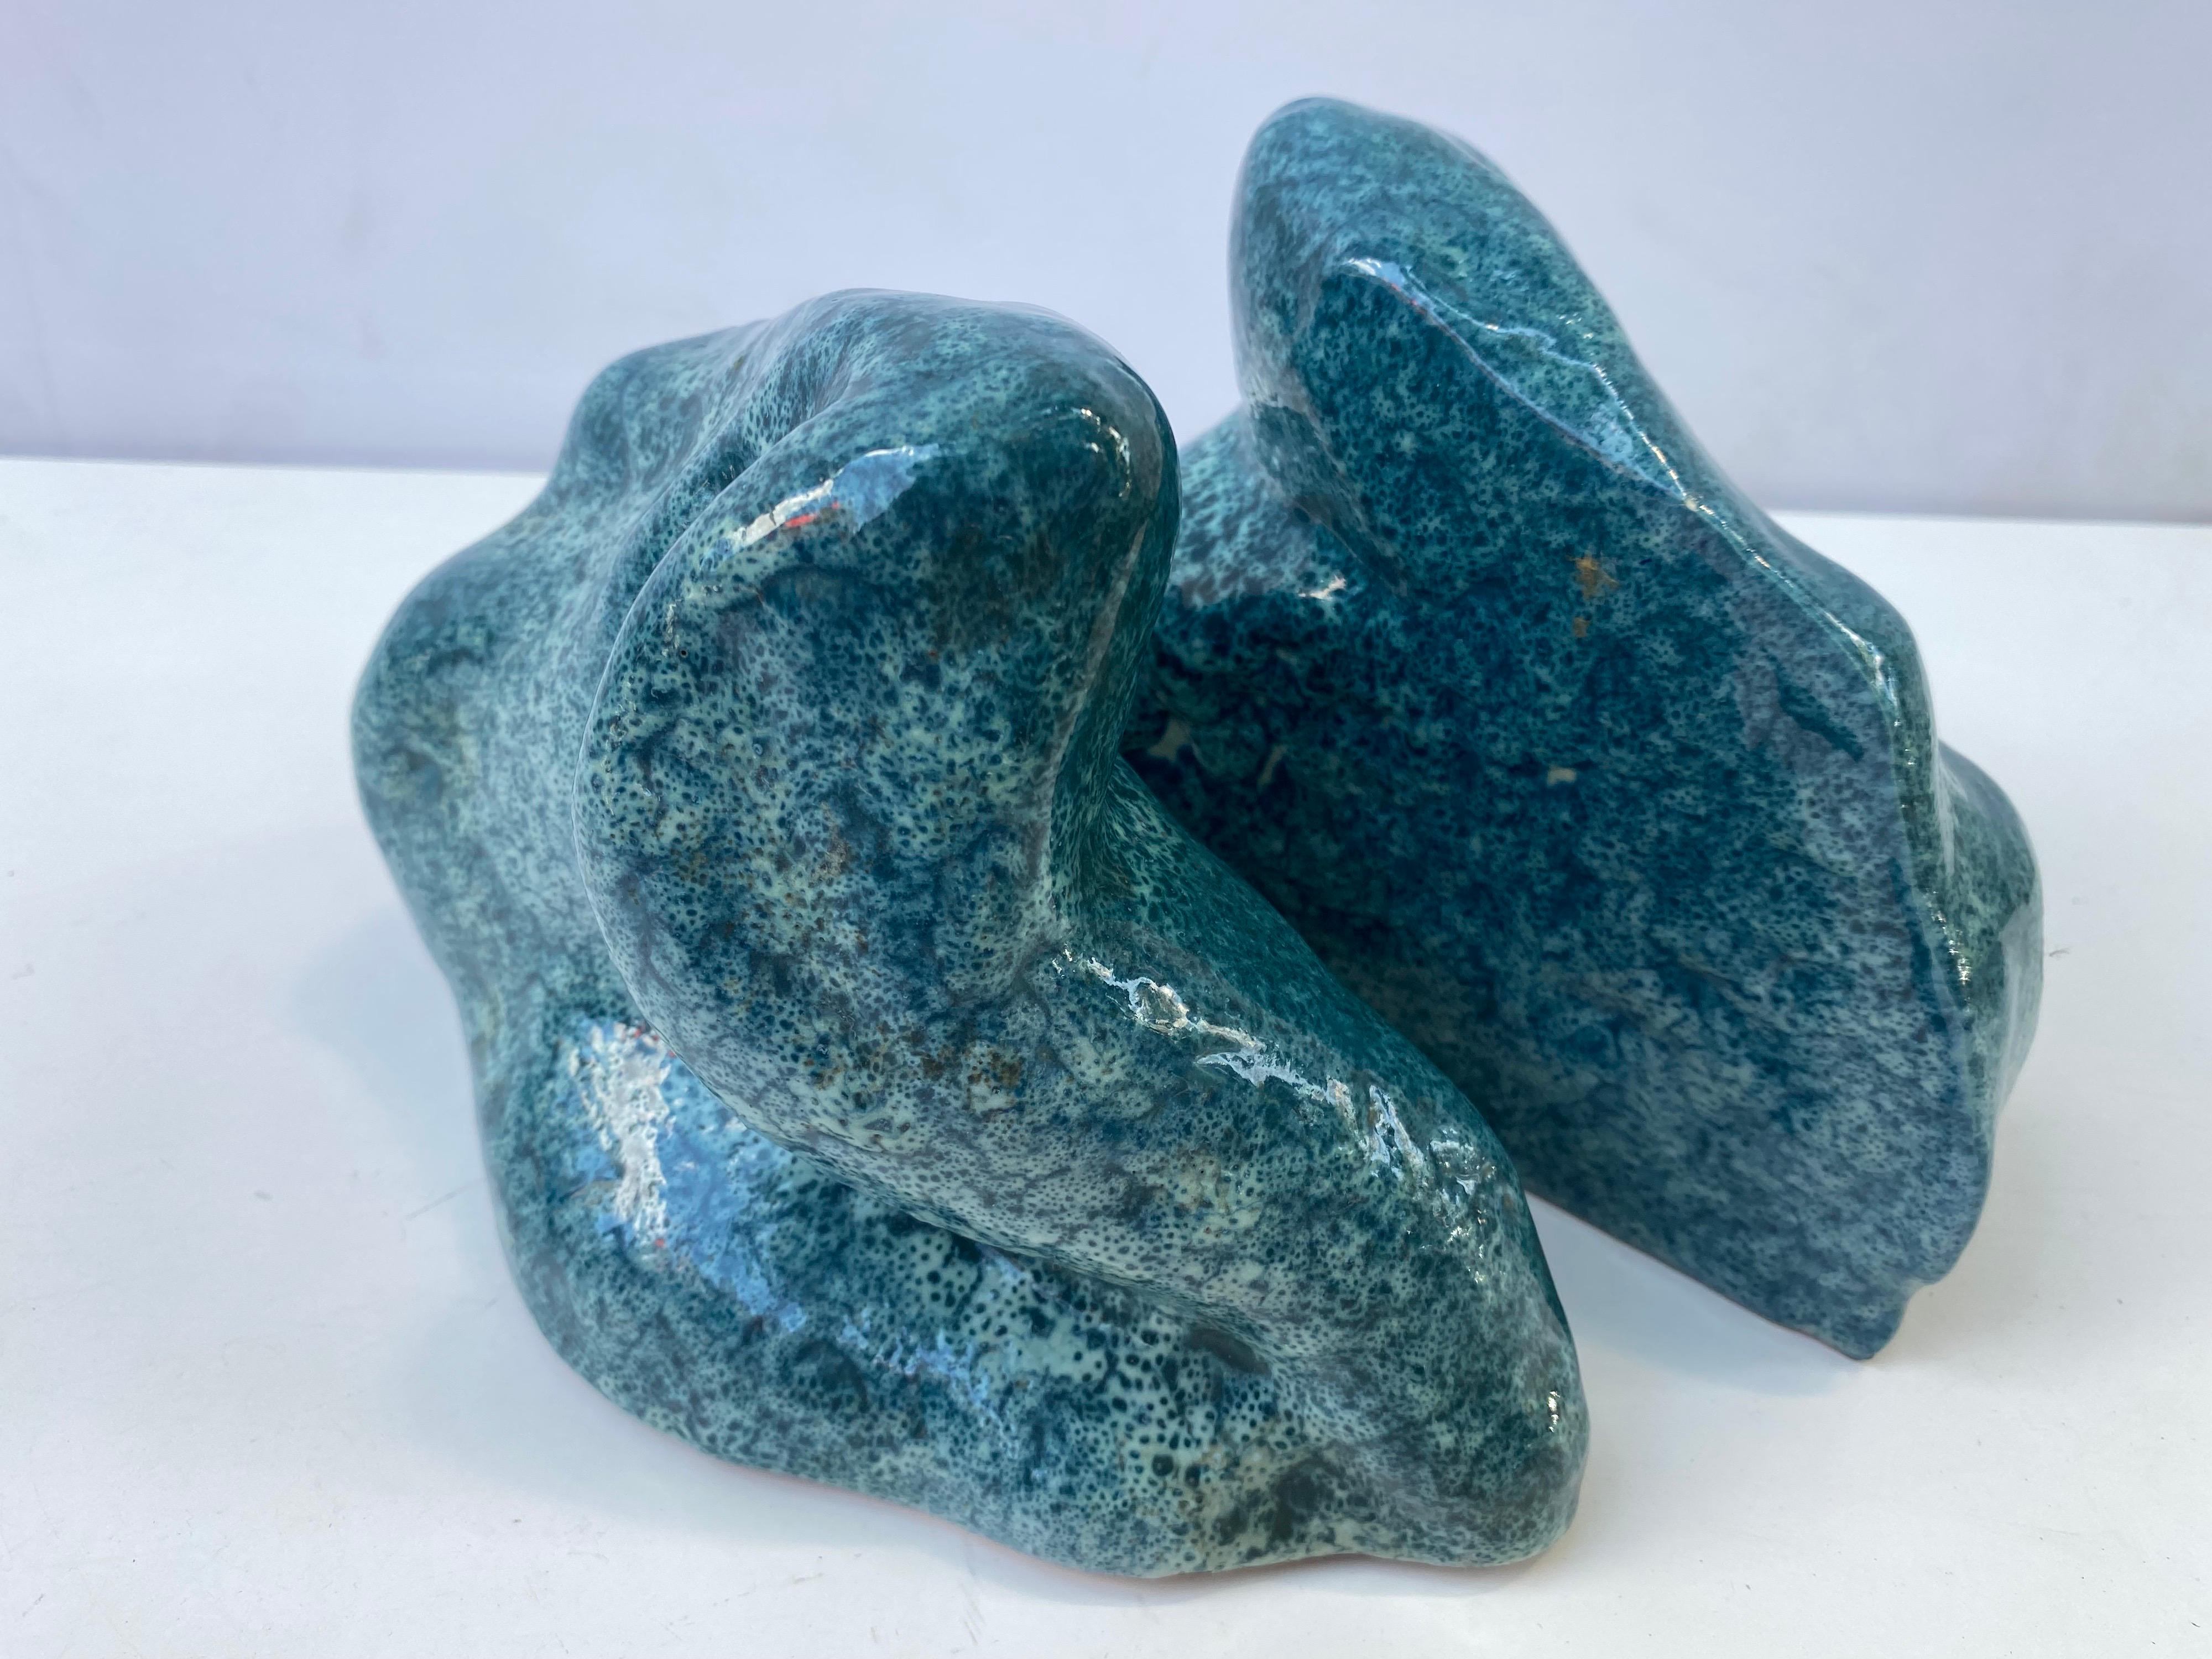 Ceramic free form blue bookends. Weighted bookends with a bluish glaze. Looks like a molten dropped liquid!